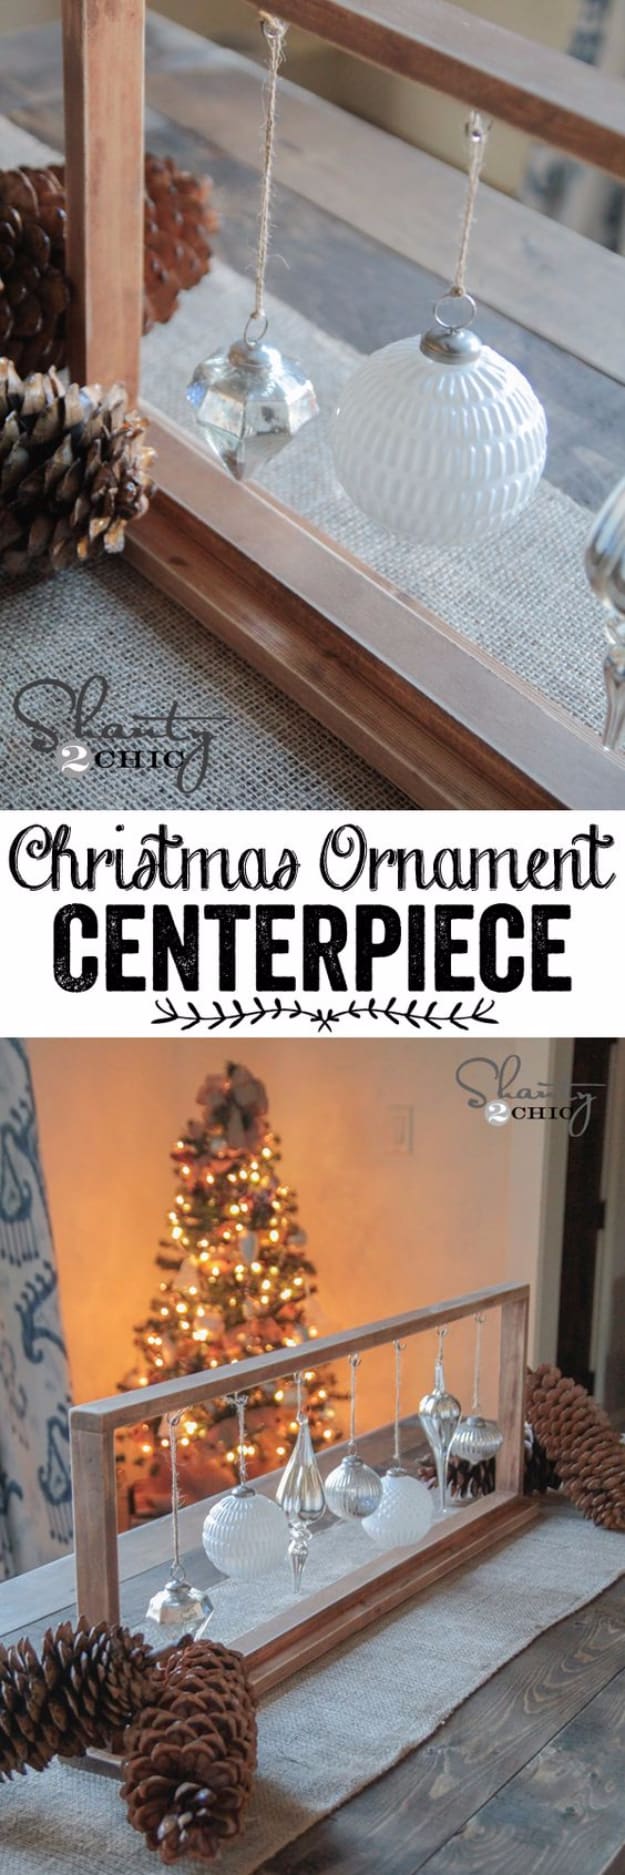 DIY Christmas Centerpieces - DIY Christmas Ornament Centerpiece - Simple, Easy Holiday Decorating Ideas on A Budget- cheap dollar store crafts holiday #holiday #crafts #christmas